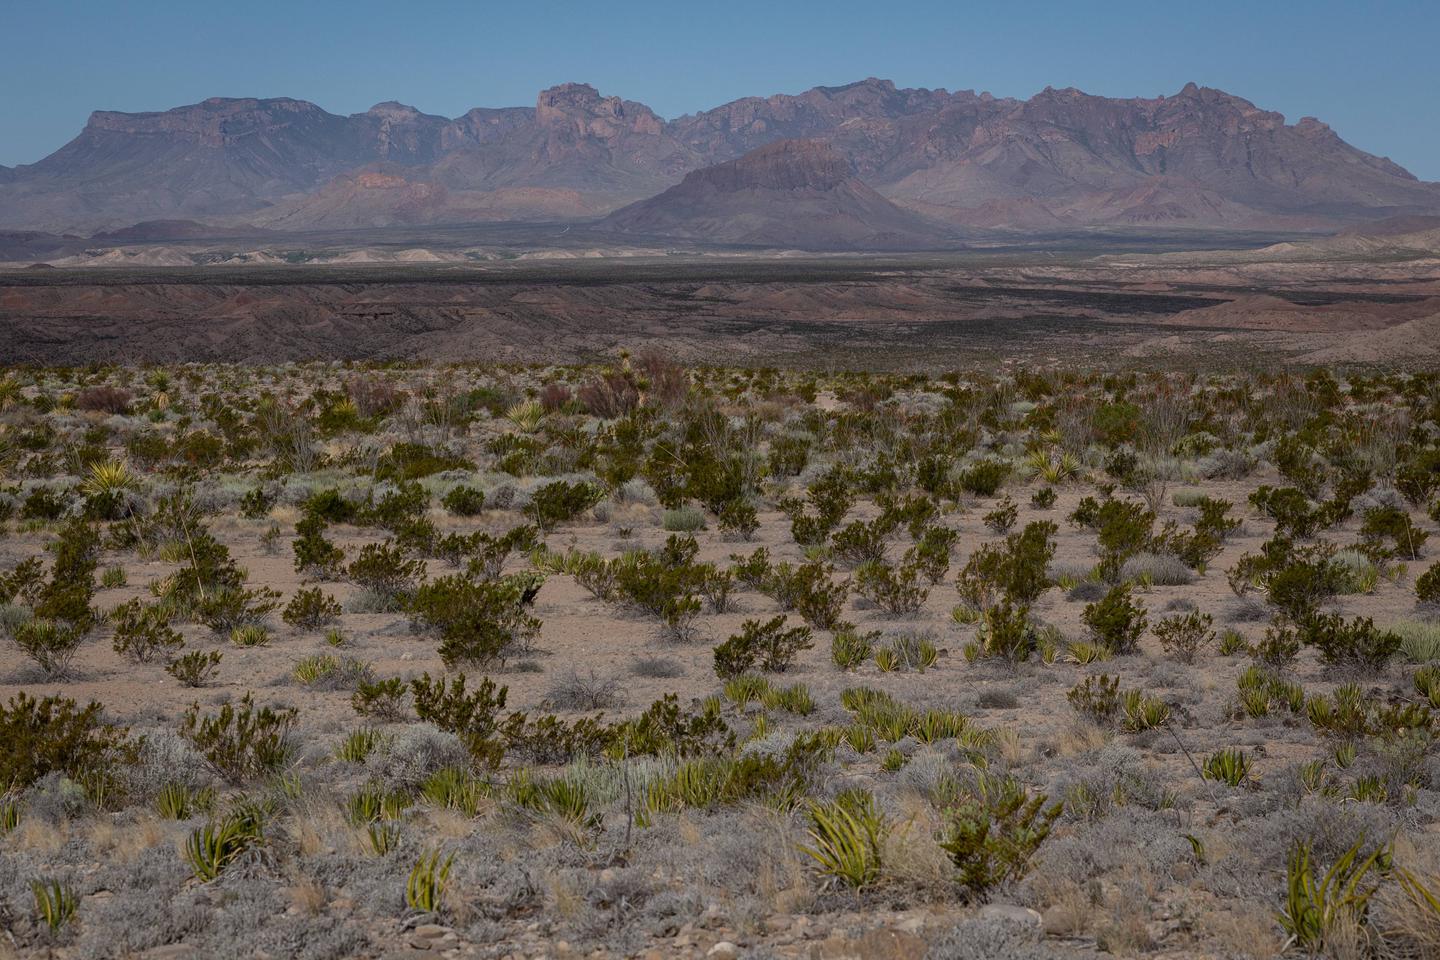 Mountains in the distance with desert foregroundDistant mountain views